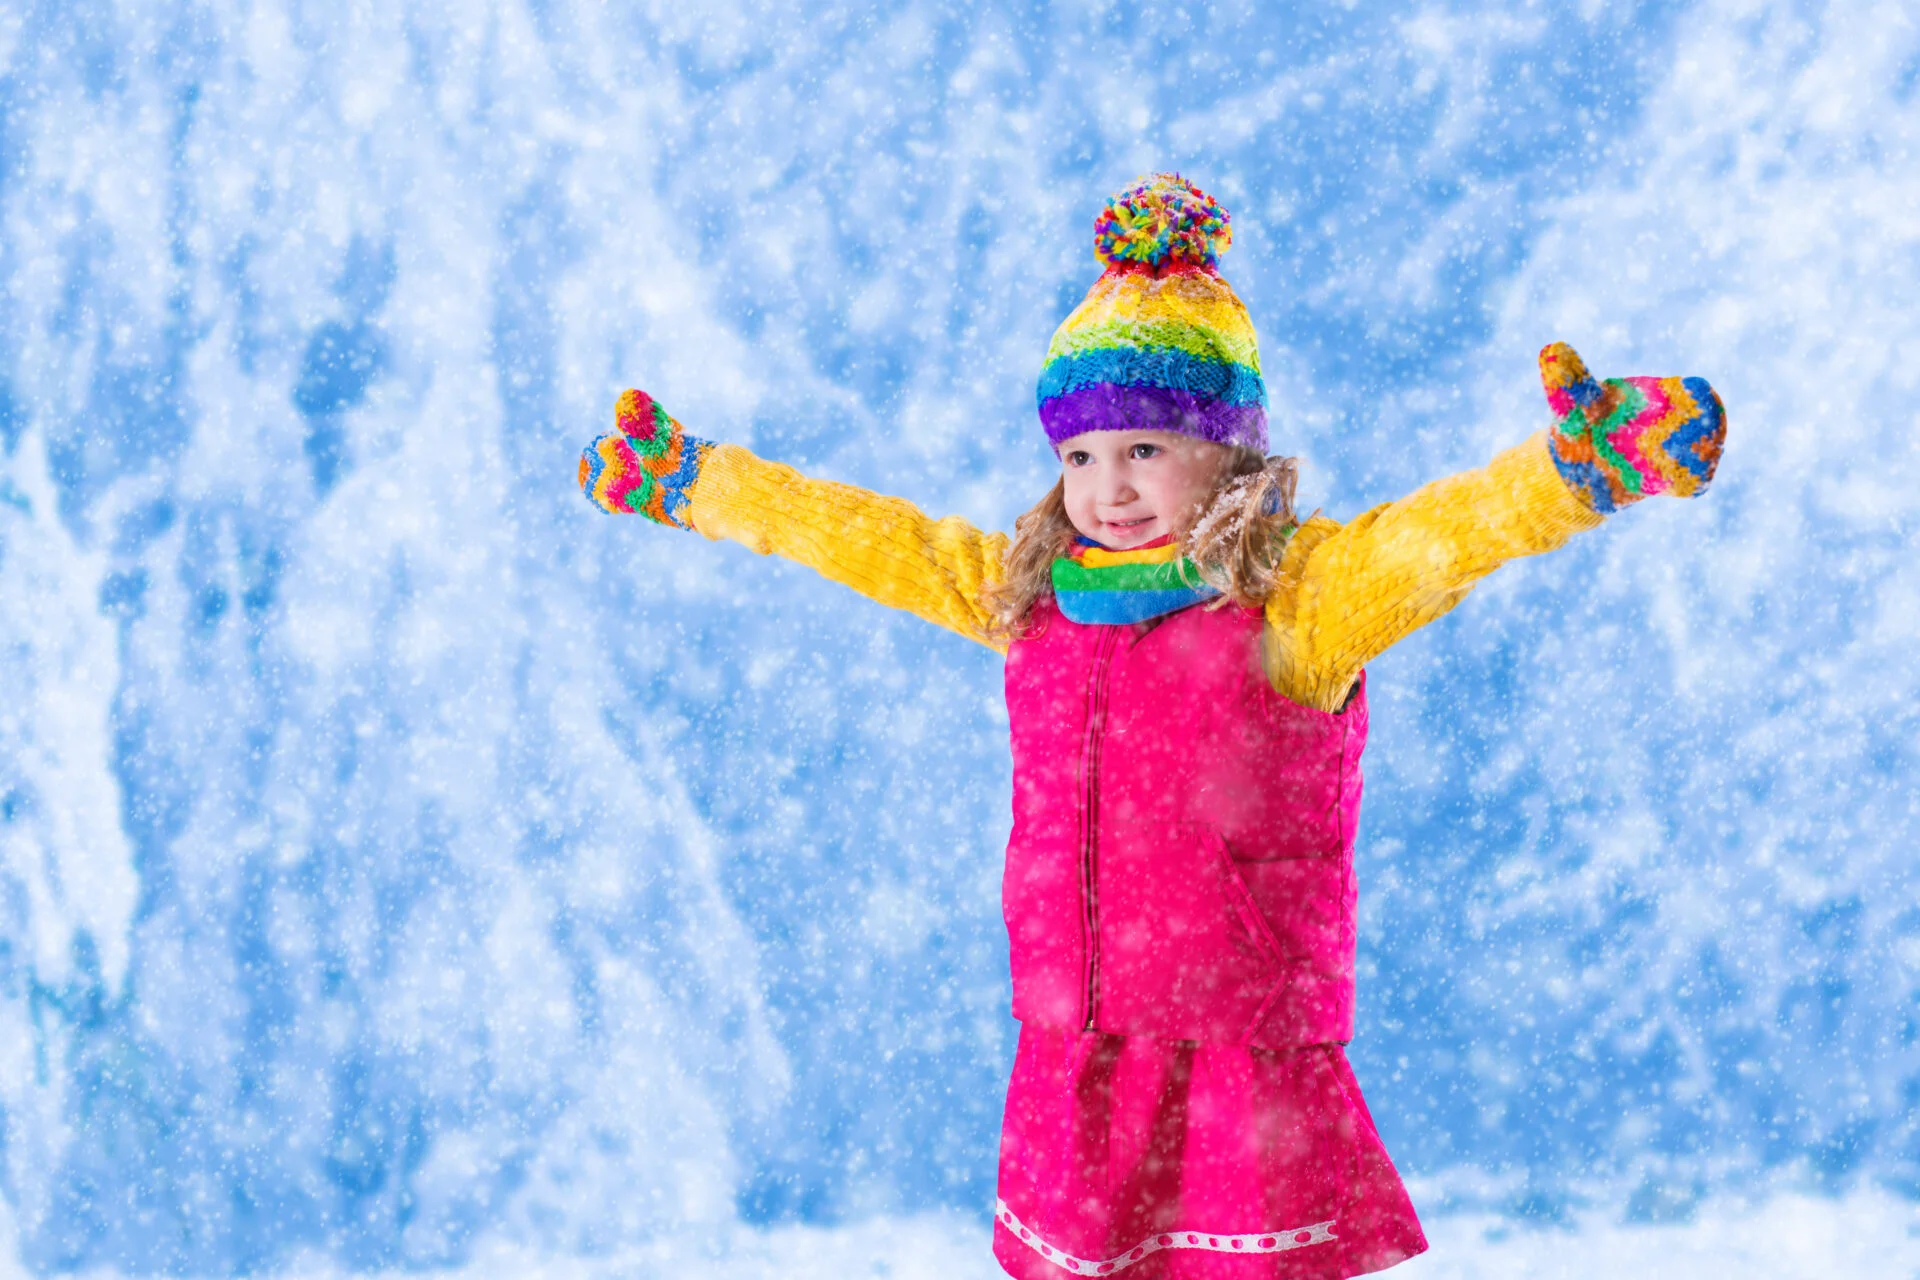 Little girl in pink jacket and colorful knitted hat catching snowflakes in winter park. Kids play outdoor in snowy forest. Children catch snow flakes. Toddler kid playing outside in snow storm